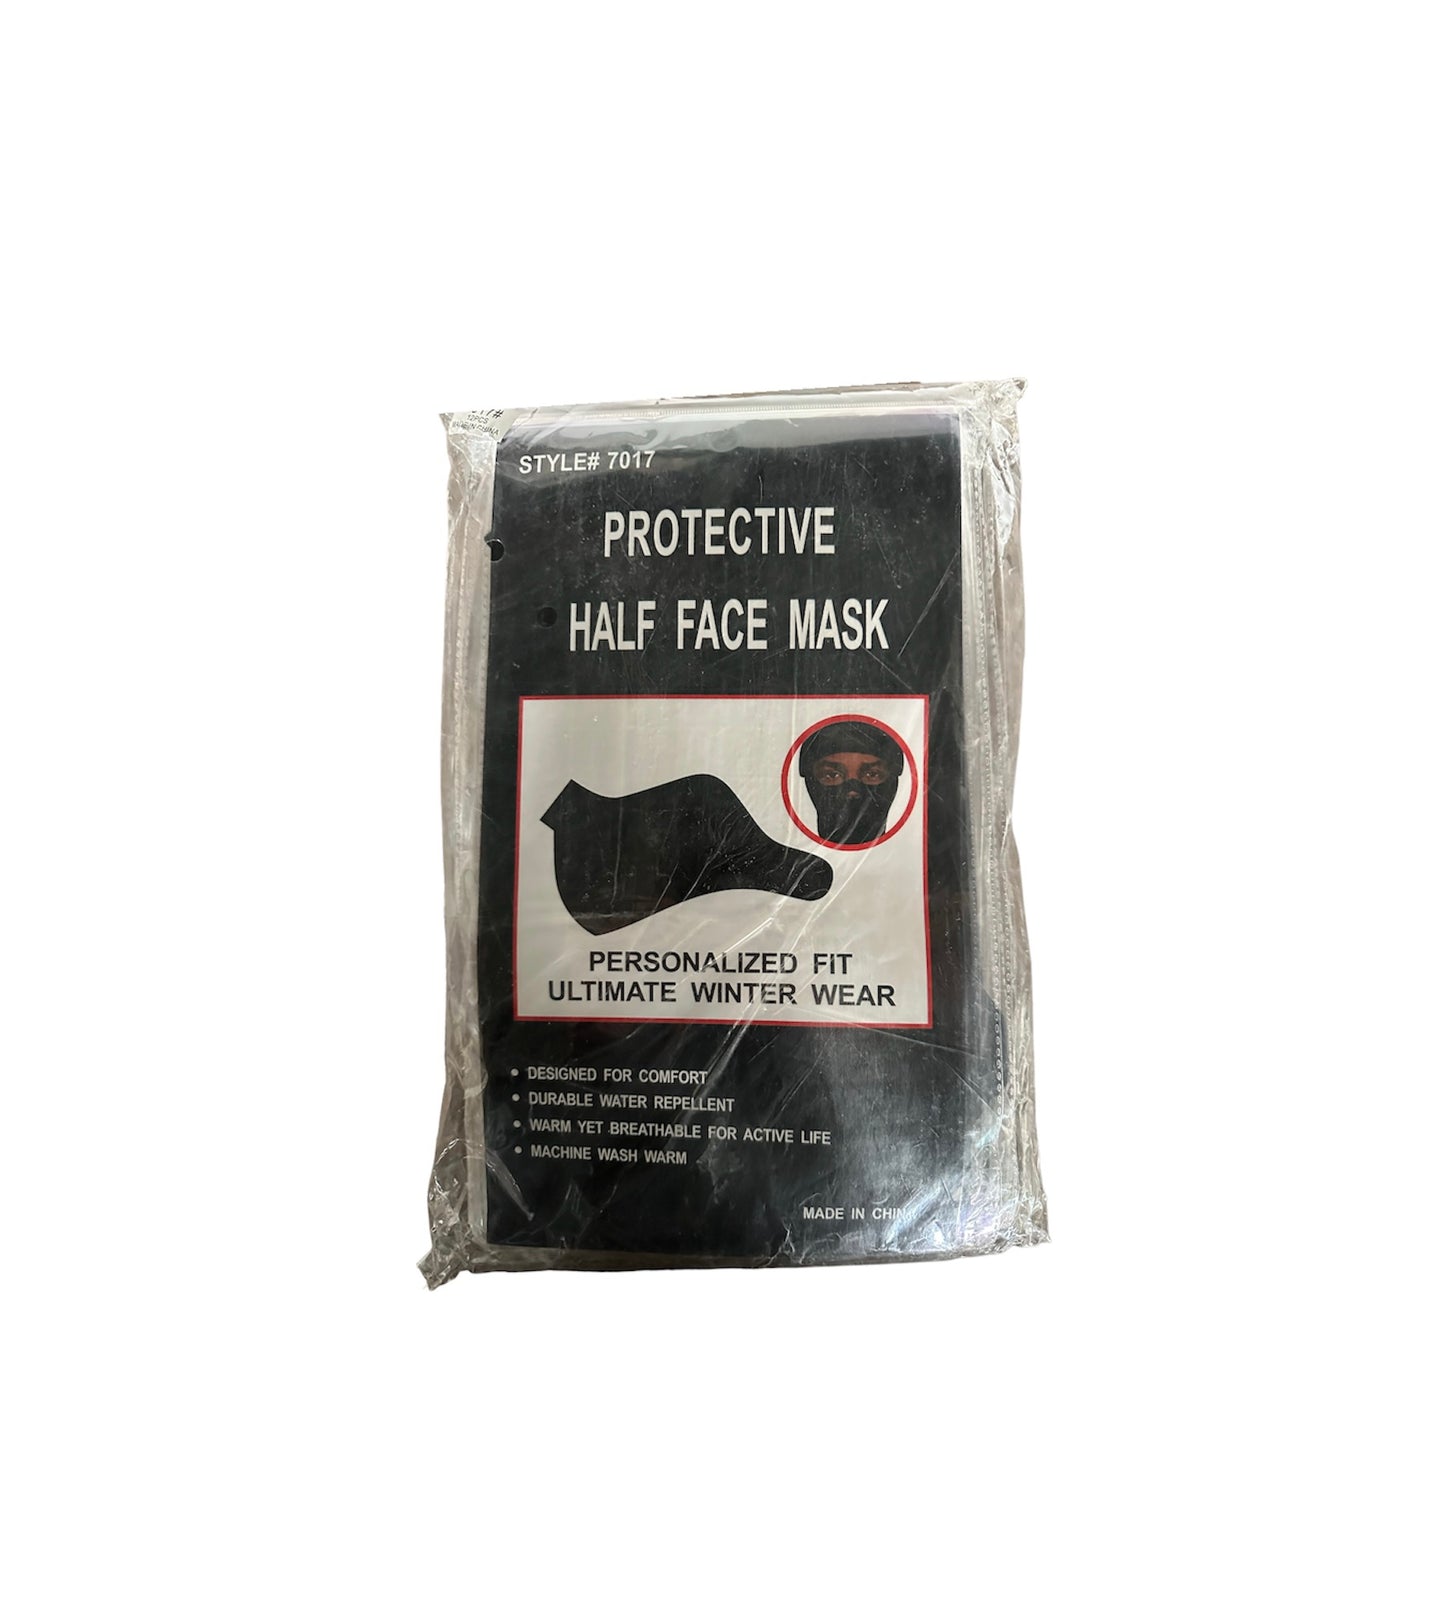 Protective Half Face Mask 12 ct